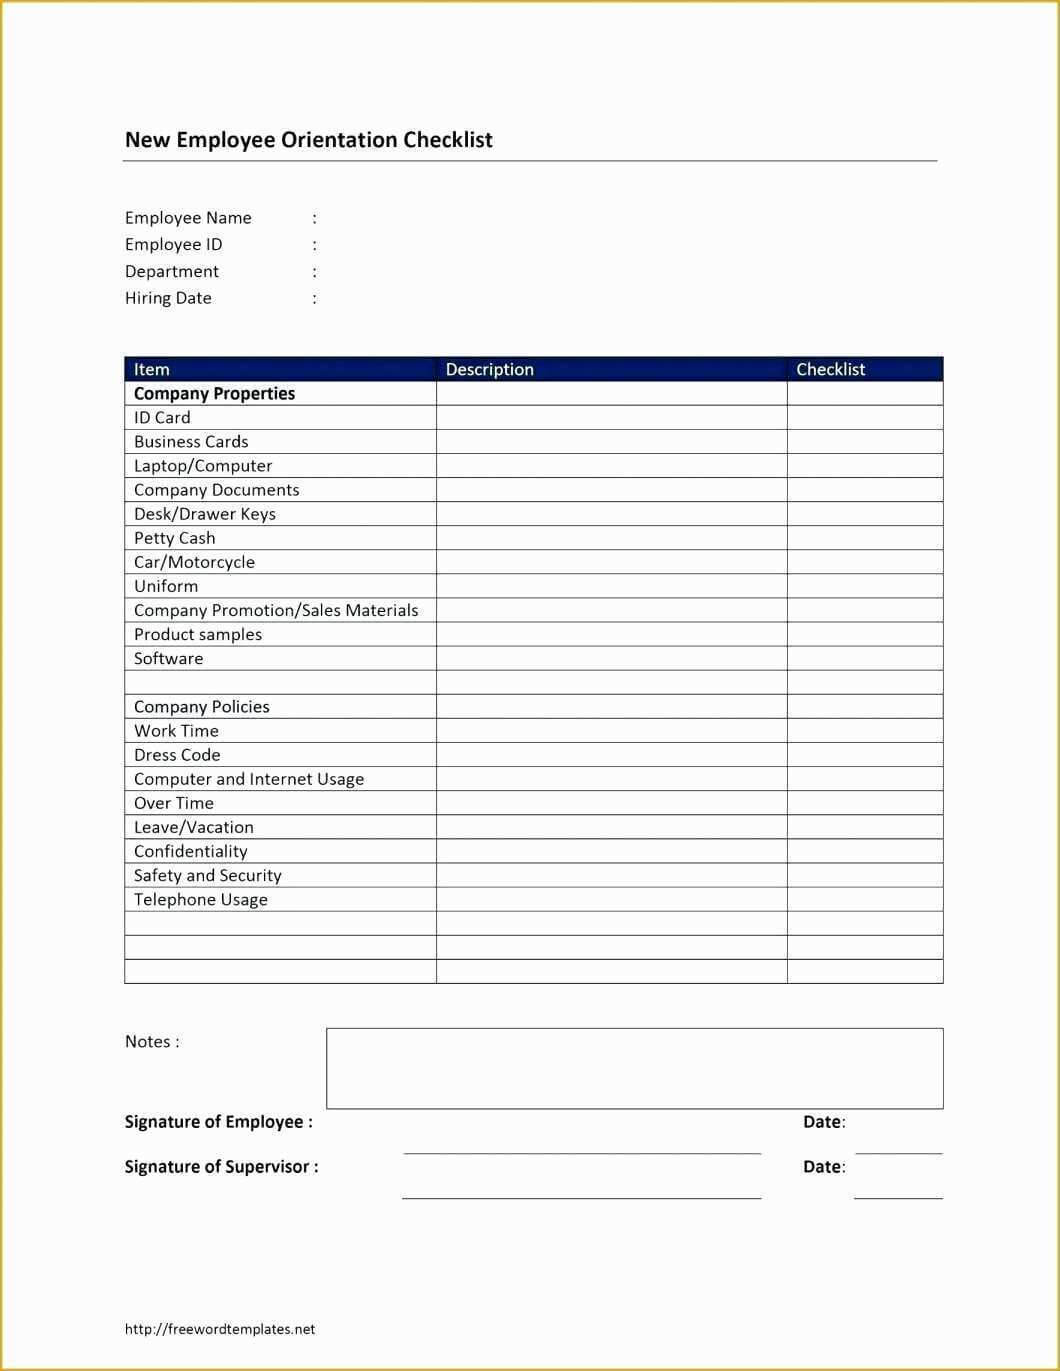 Report Card Template Format Elementary School Excel Download Within Homeschool Report Card Template